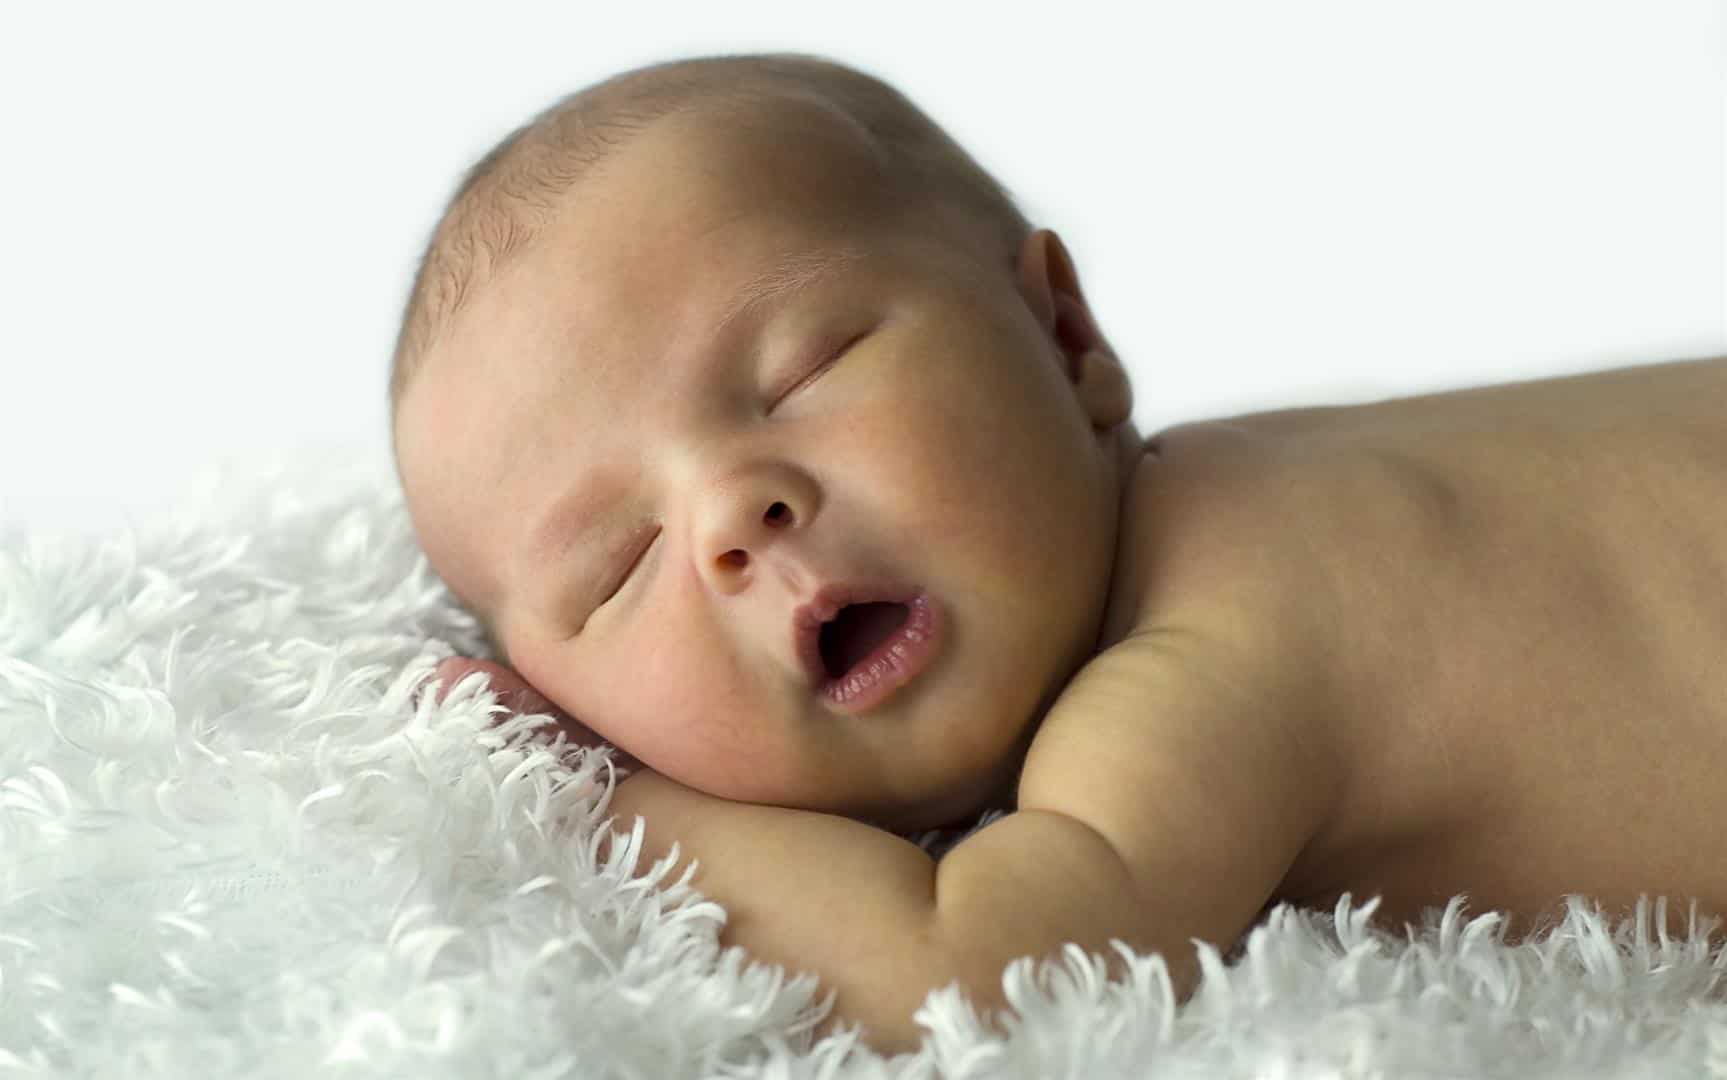 A New Parent’s Guide to Safe Sleep Practices for Babies